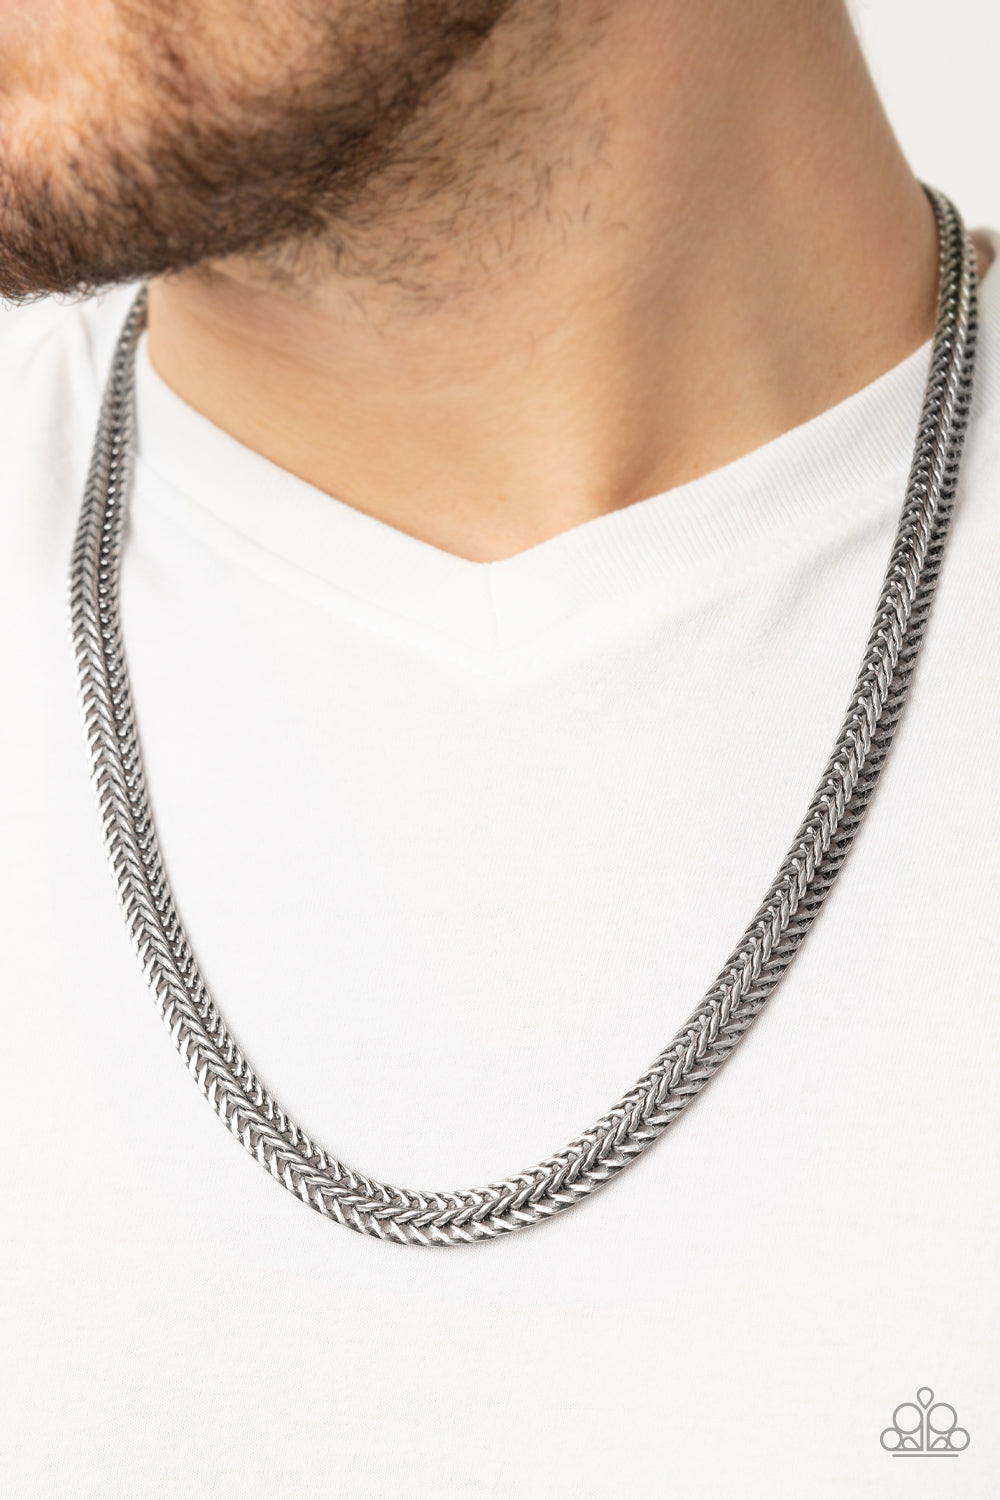 Modern Motorhead - – Sugar Bling Jewelry Chain and - Urban Bee Accessories Silver Paparazzi Necklace